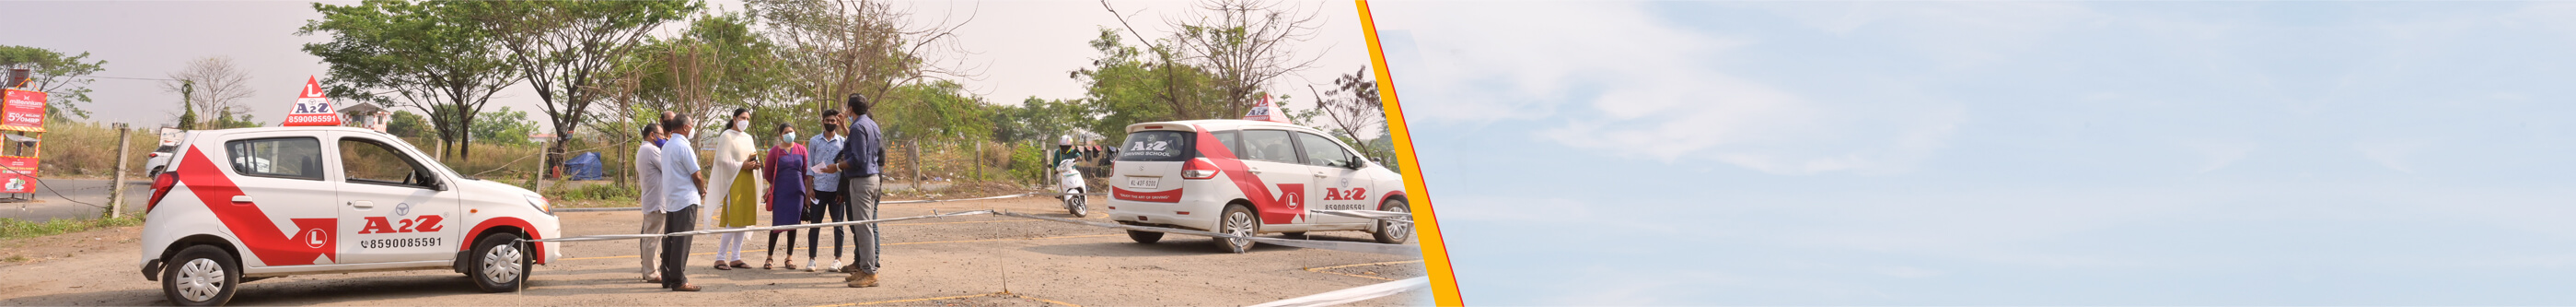 Welcome to A2Z Driving School|About Us